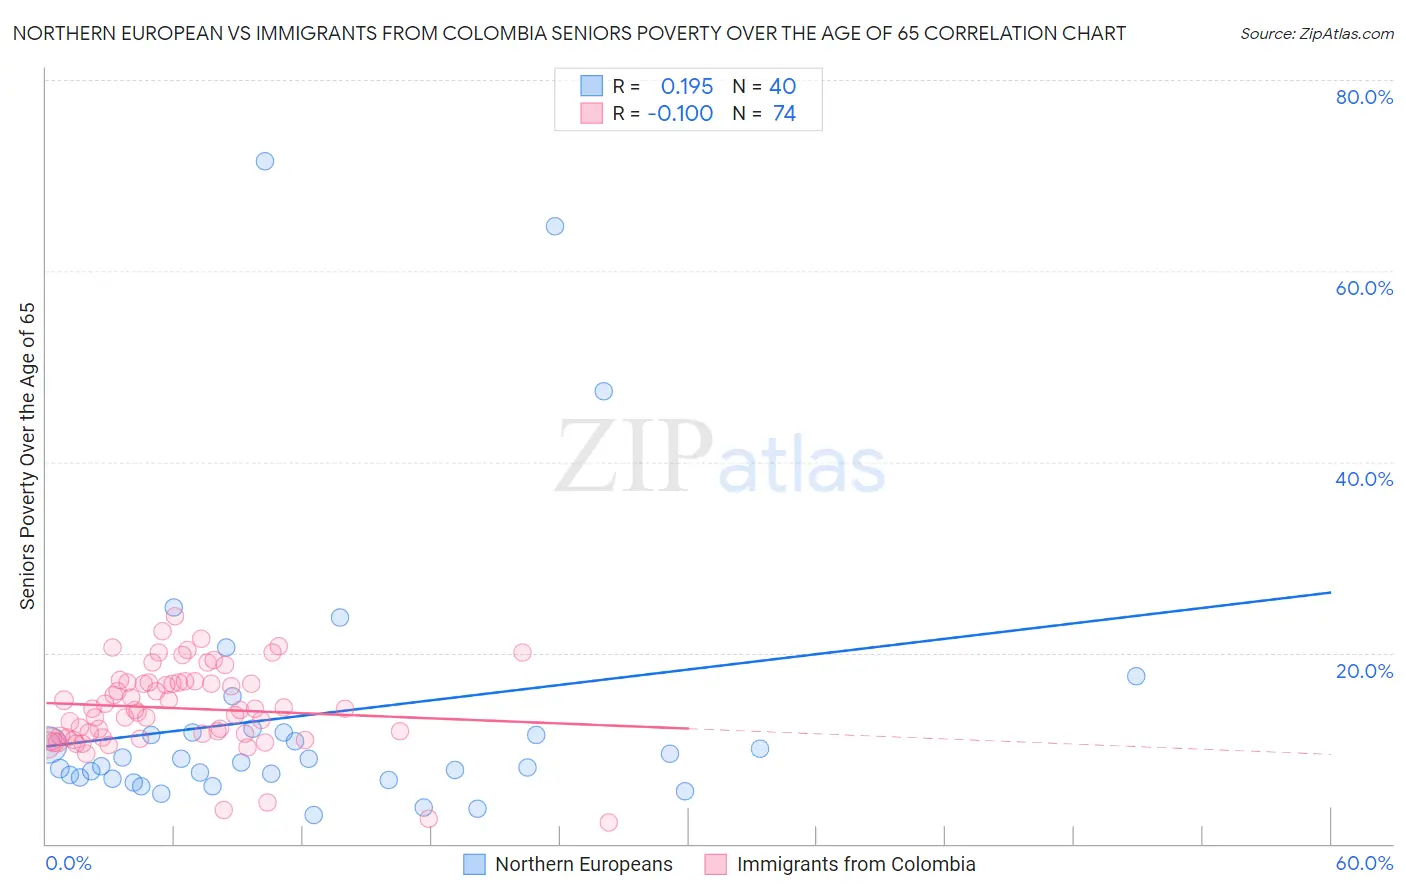 Northern European vs Immigrants from Colombia Seniors Poverty Over the Age of 65